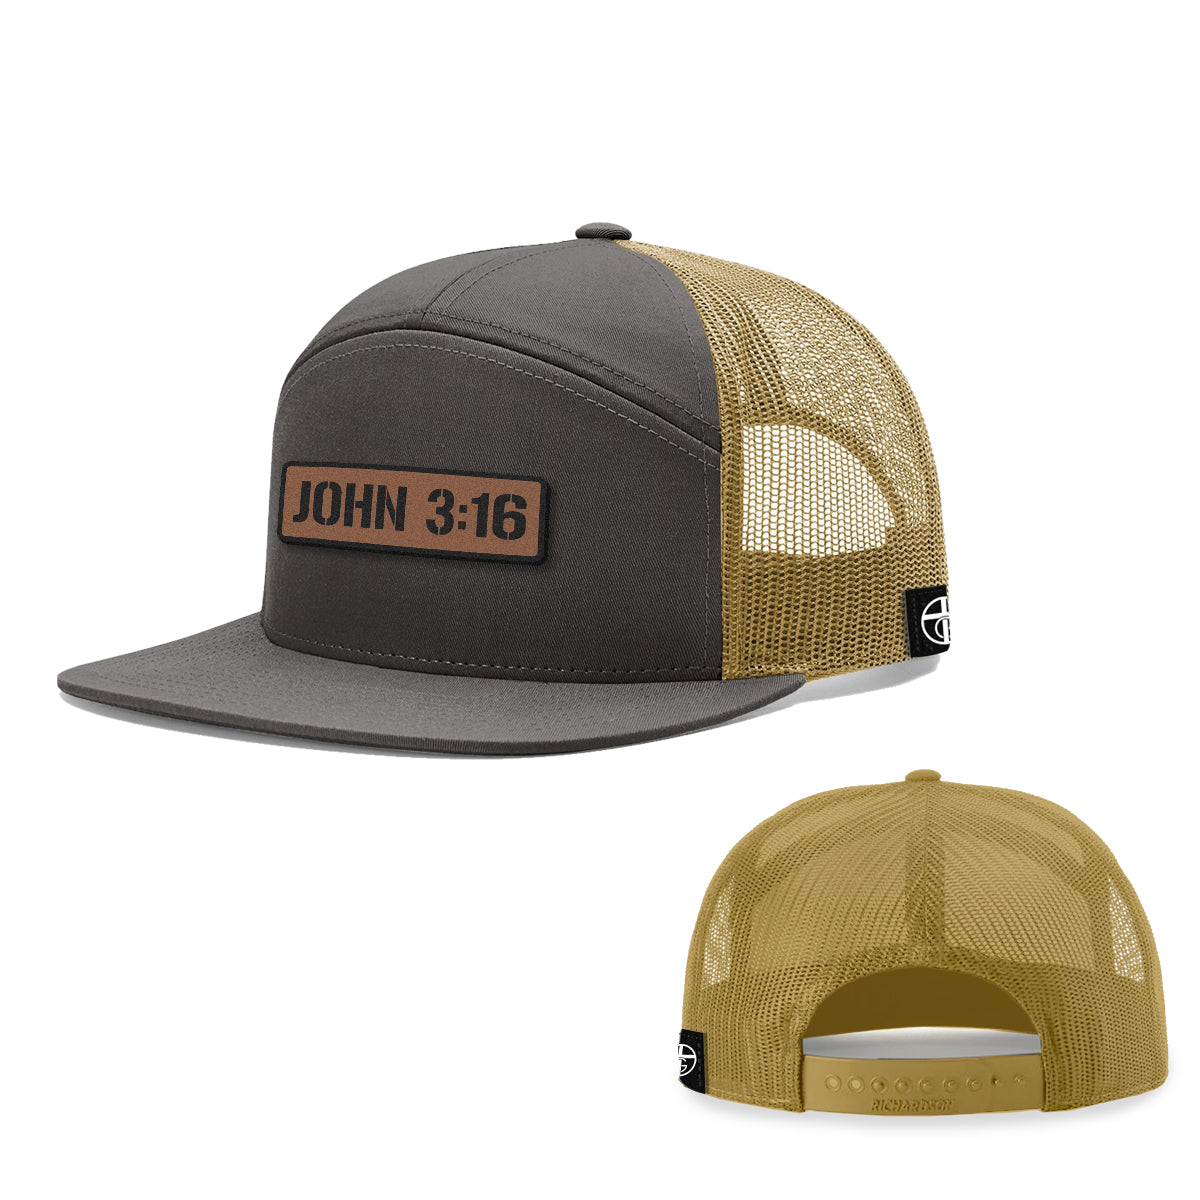 John 3:16 Leather Patch 7 Panel Hats